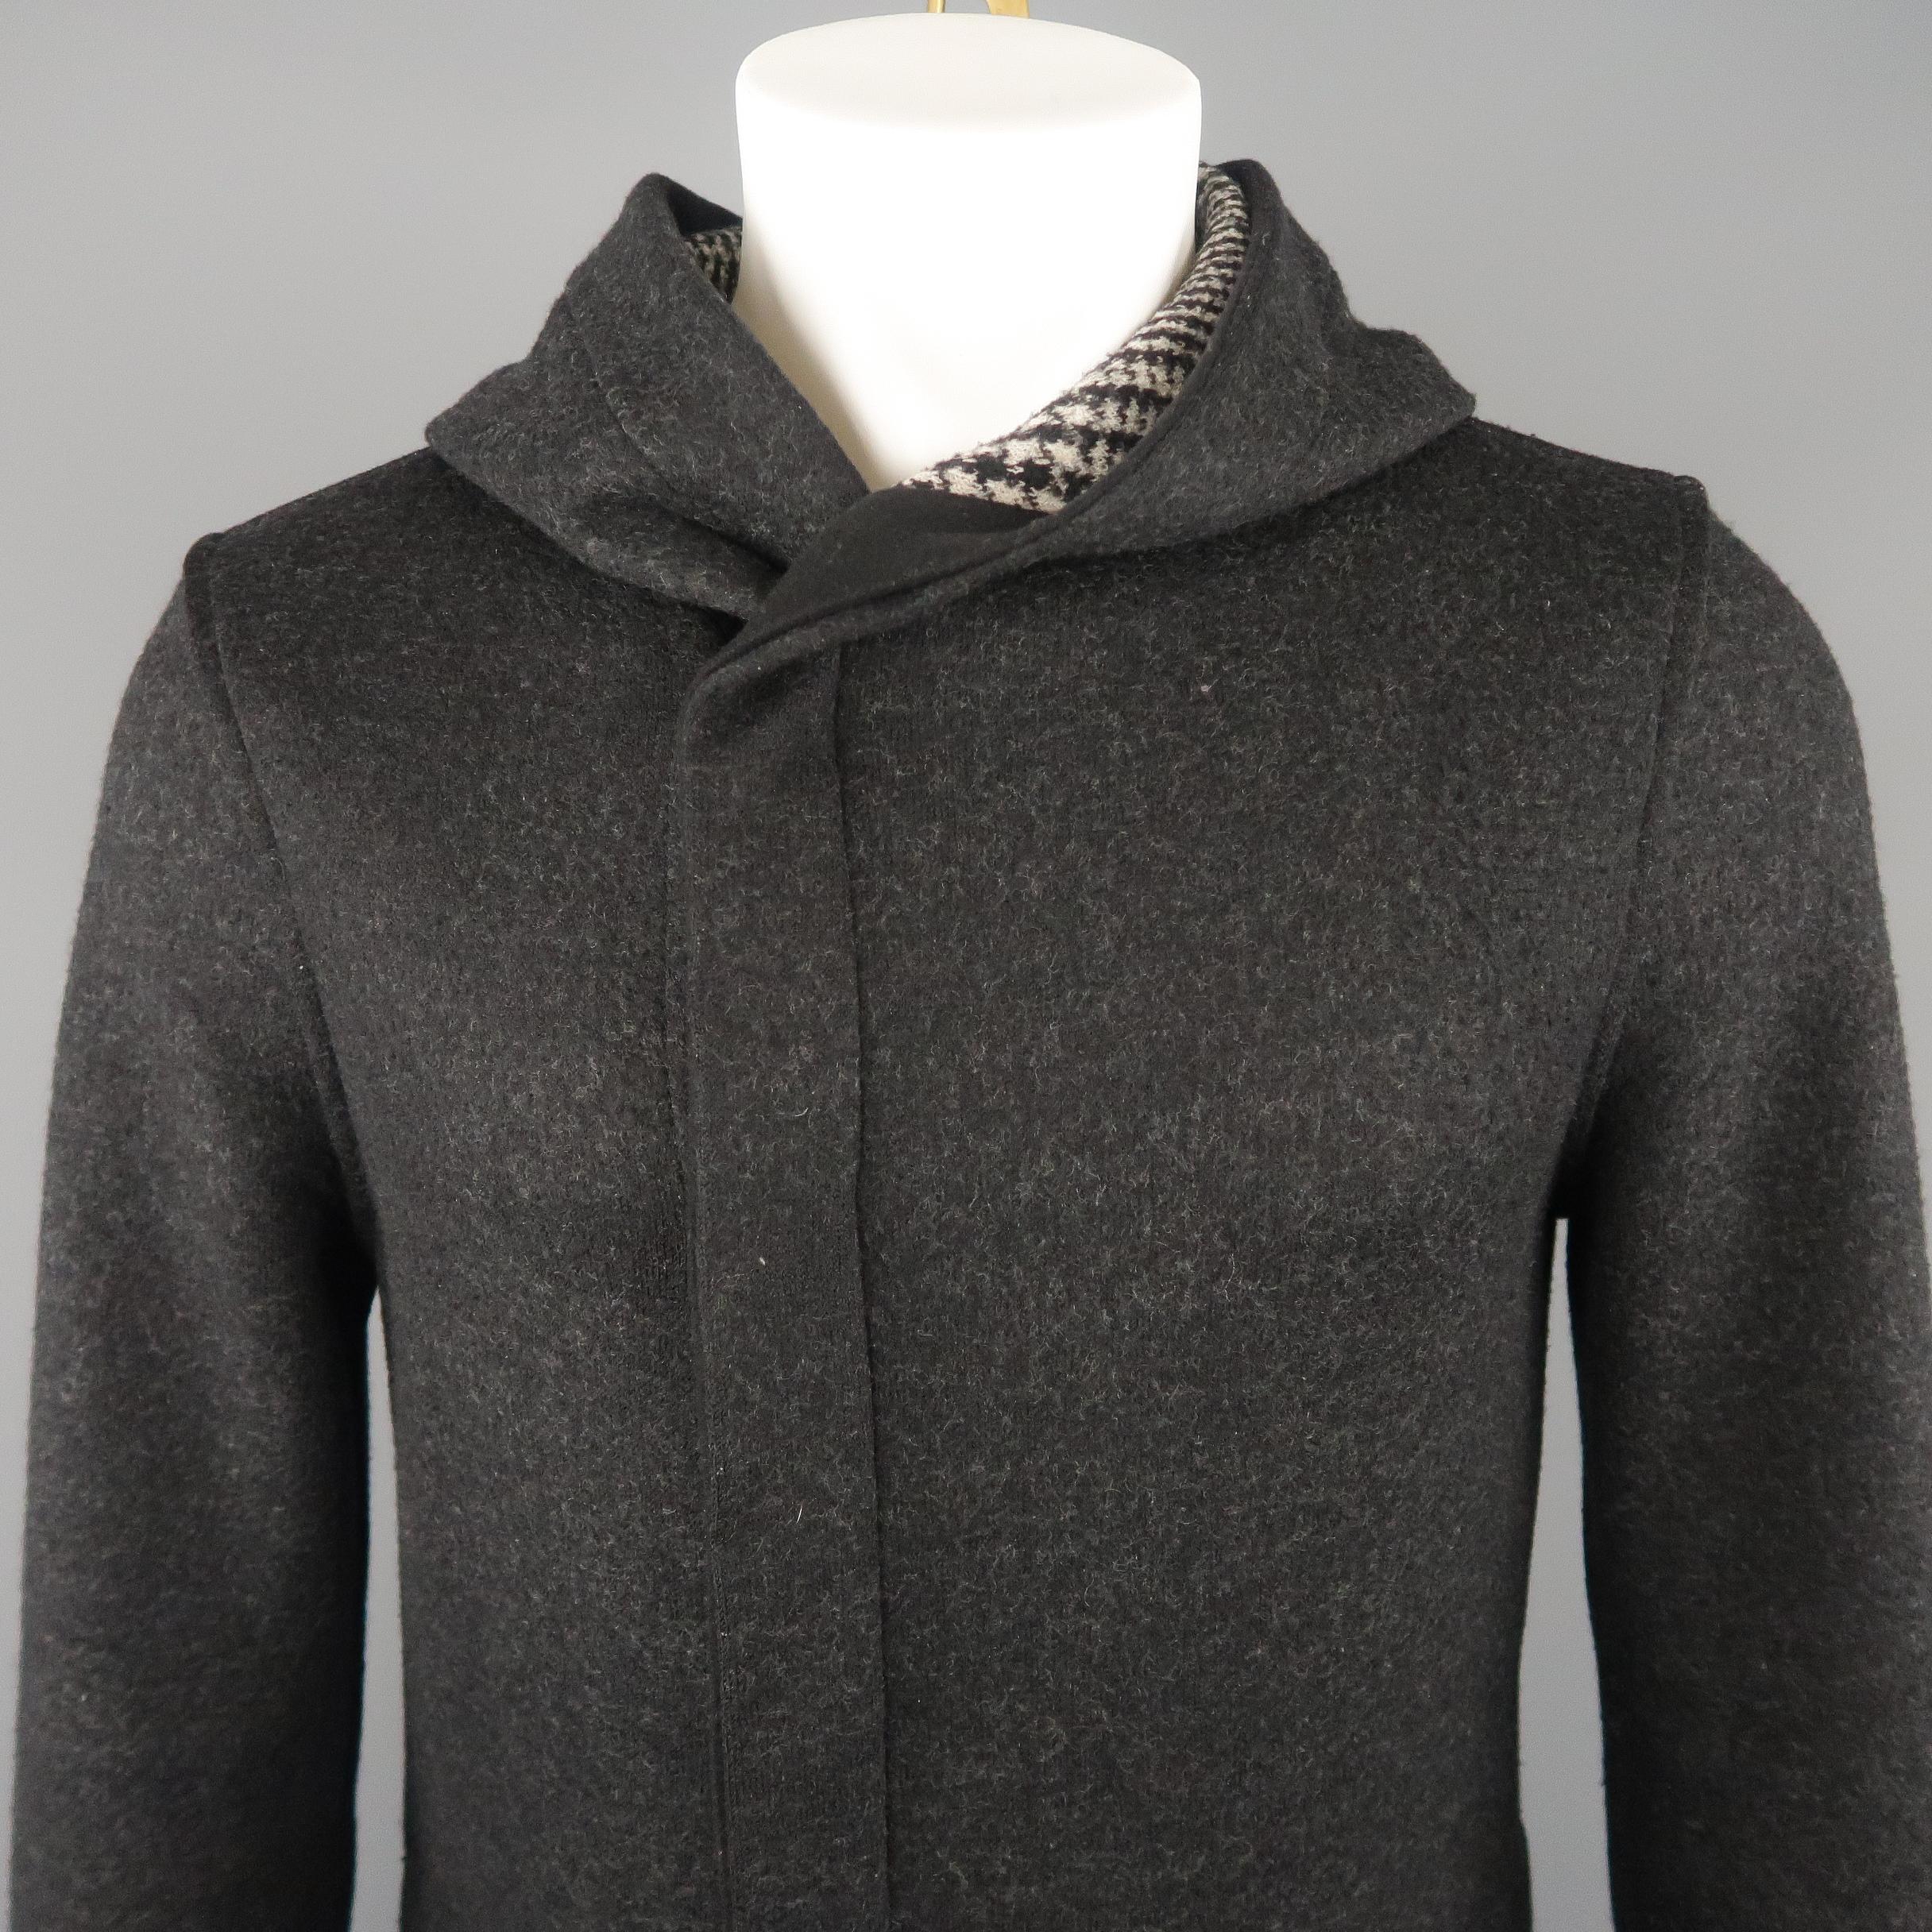 EMPORIO ARMANI coat comes in heather charcoal gray wool bend knit with a double breasted hidden snap closure, inner patch pockets, and hood with houndstooth liner. Made in Romania.
 
Excellent Pre-Owned Condition.
Marked: IT 46
 
Measurements:
